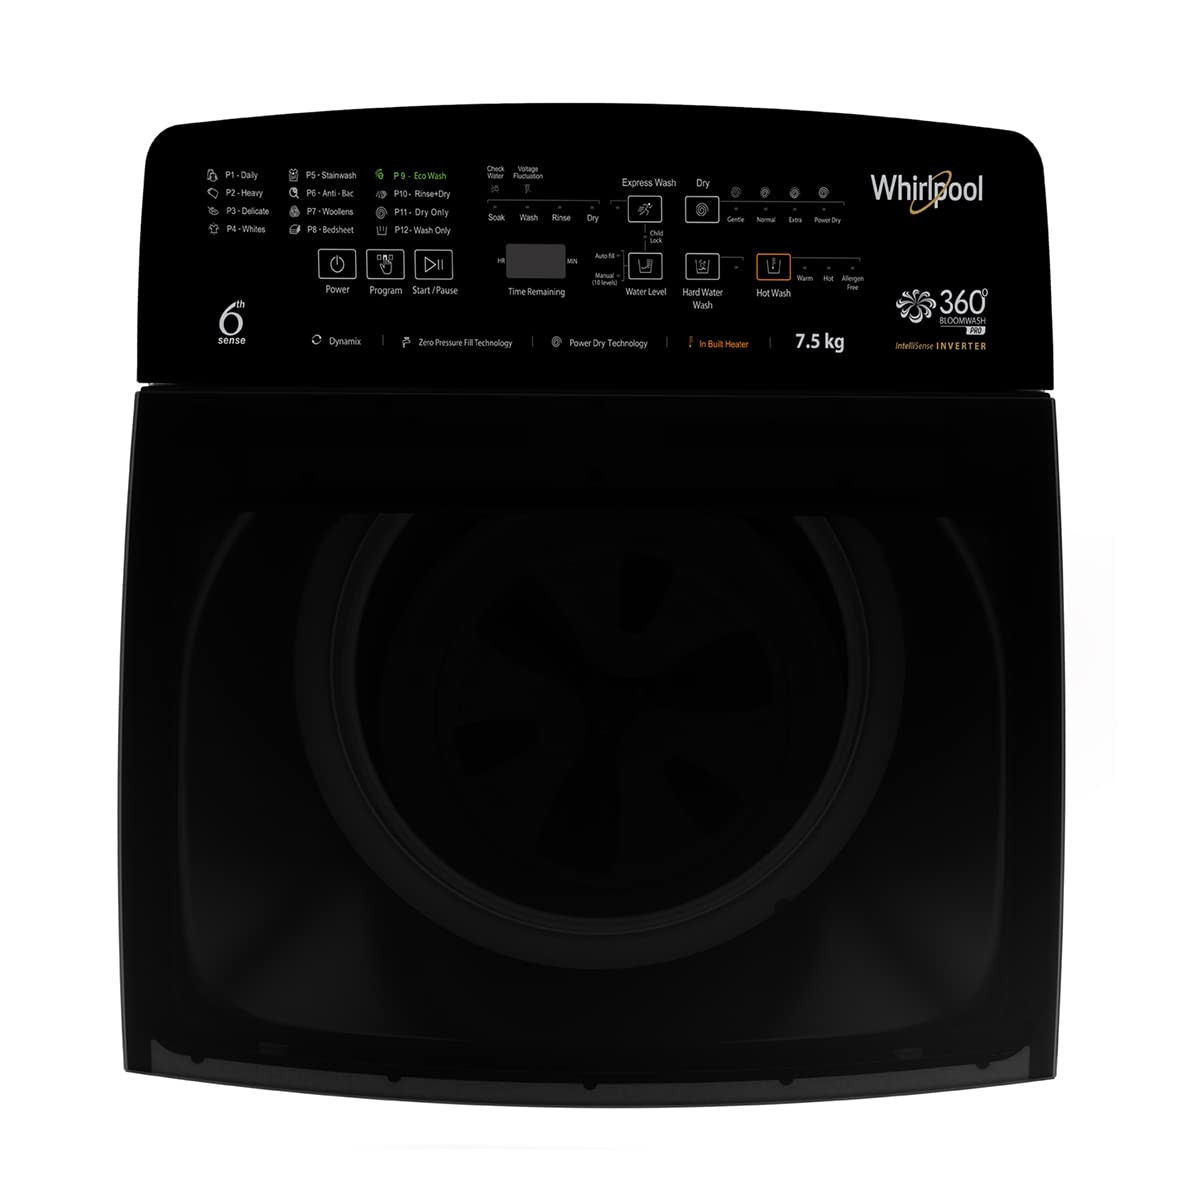 Whirlpool 75 Kg 5 Star Bloom Wash Fully-Automatic Top Loading Washing Machine 360 BW PRO 540 H 75 GRAPHITE 10 YMW Graphite In-Built Heater